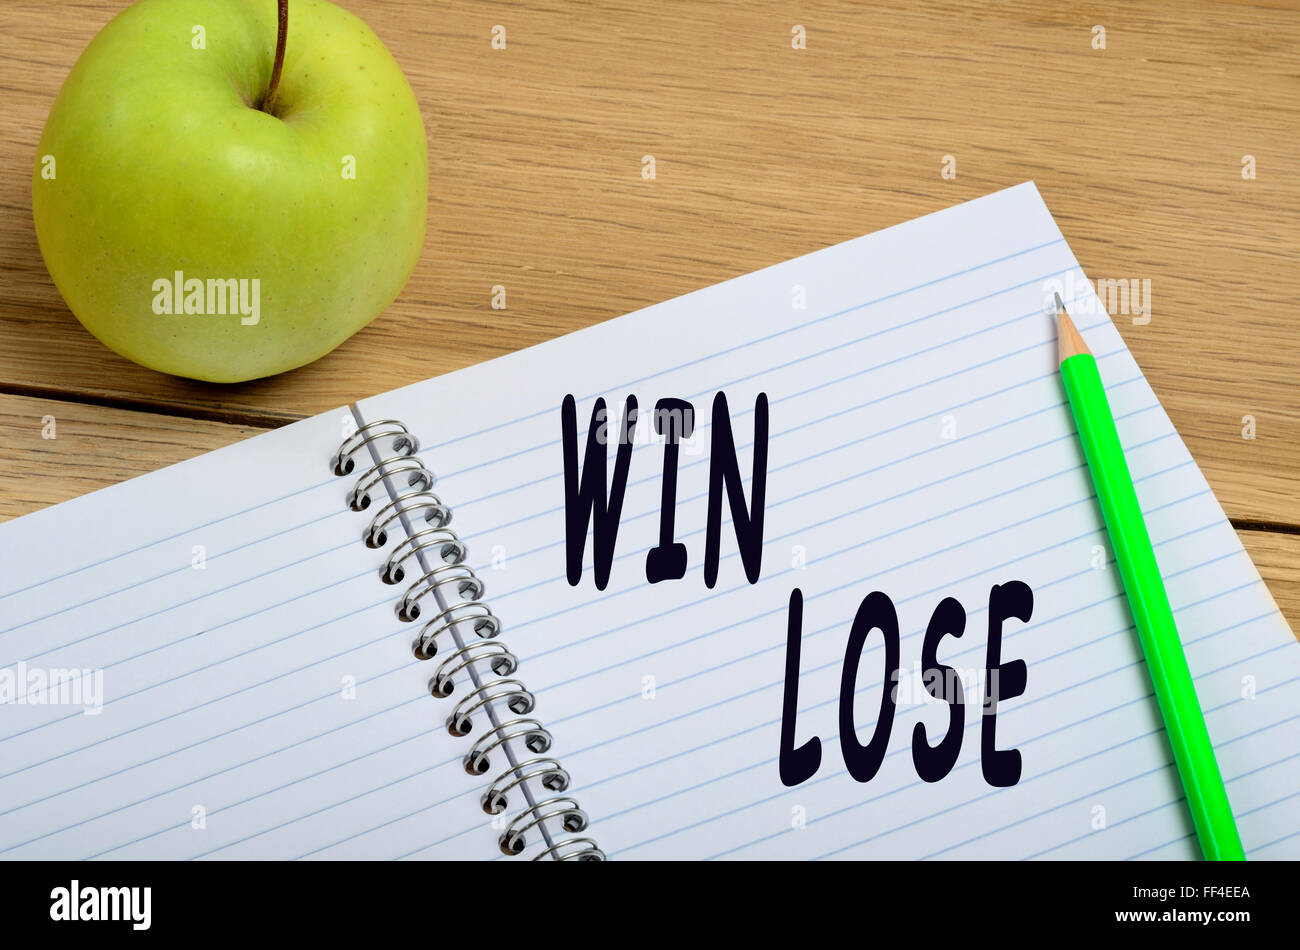 Win Lose words on notebook Stock Photo